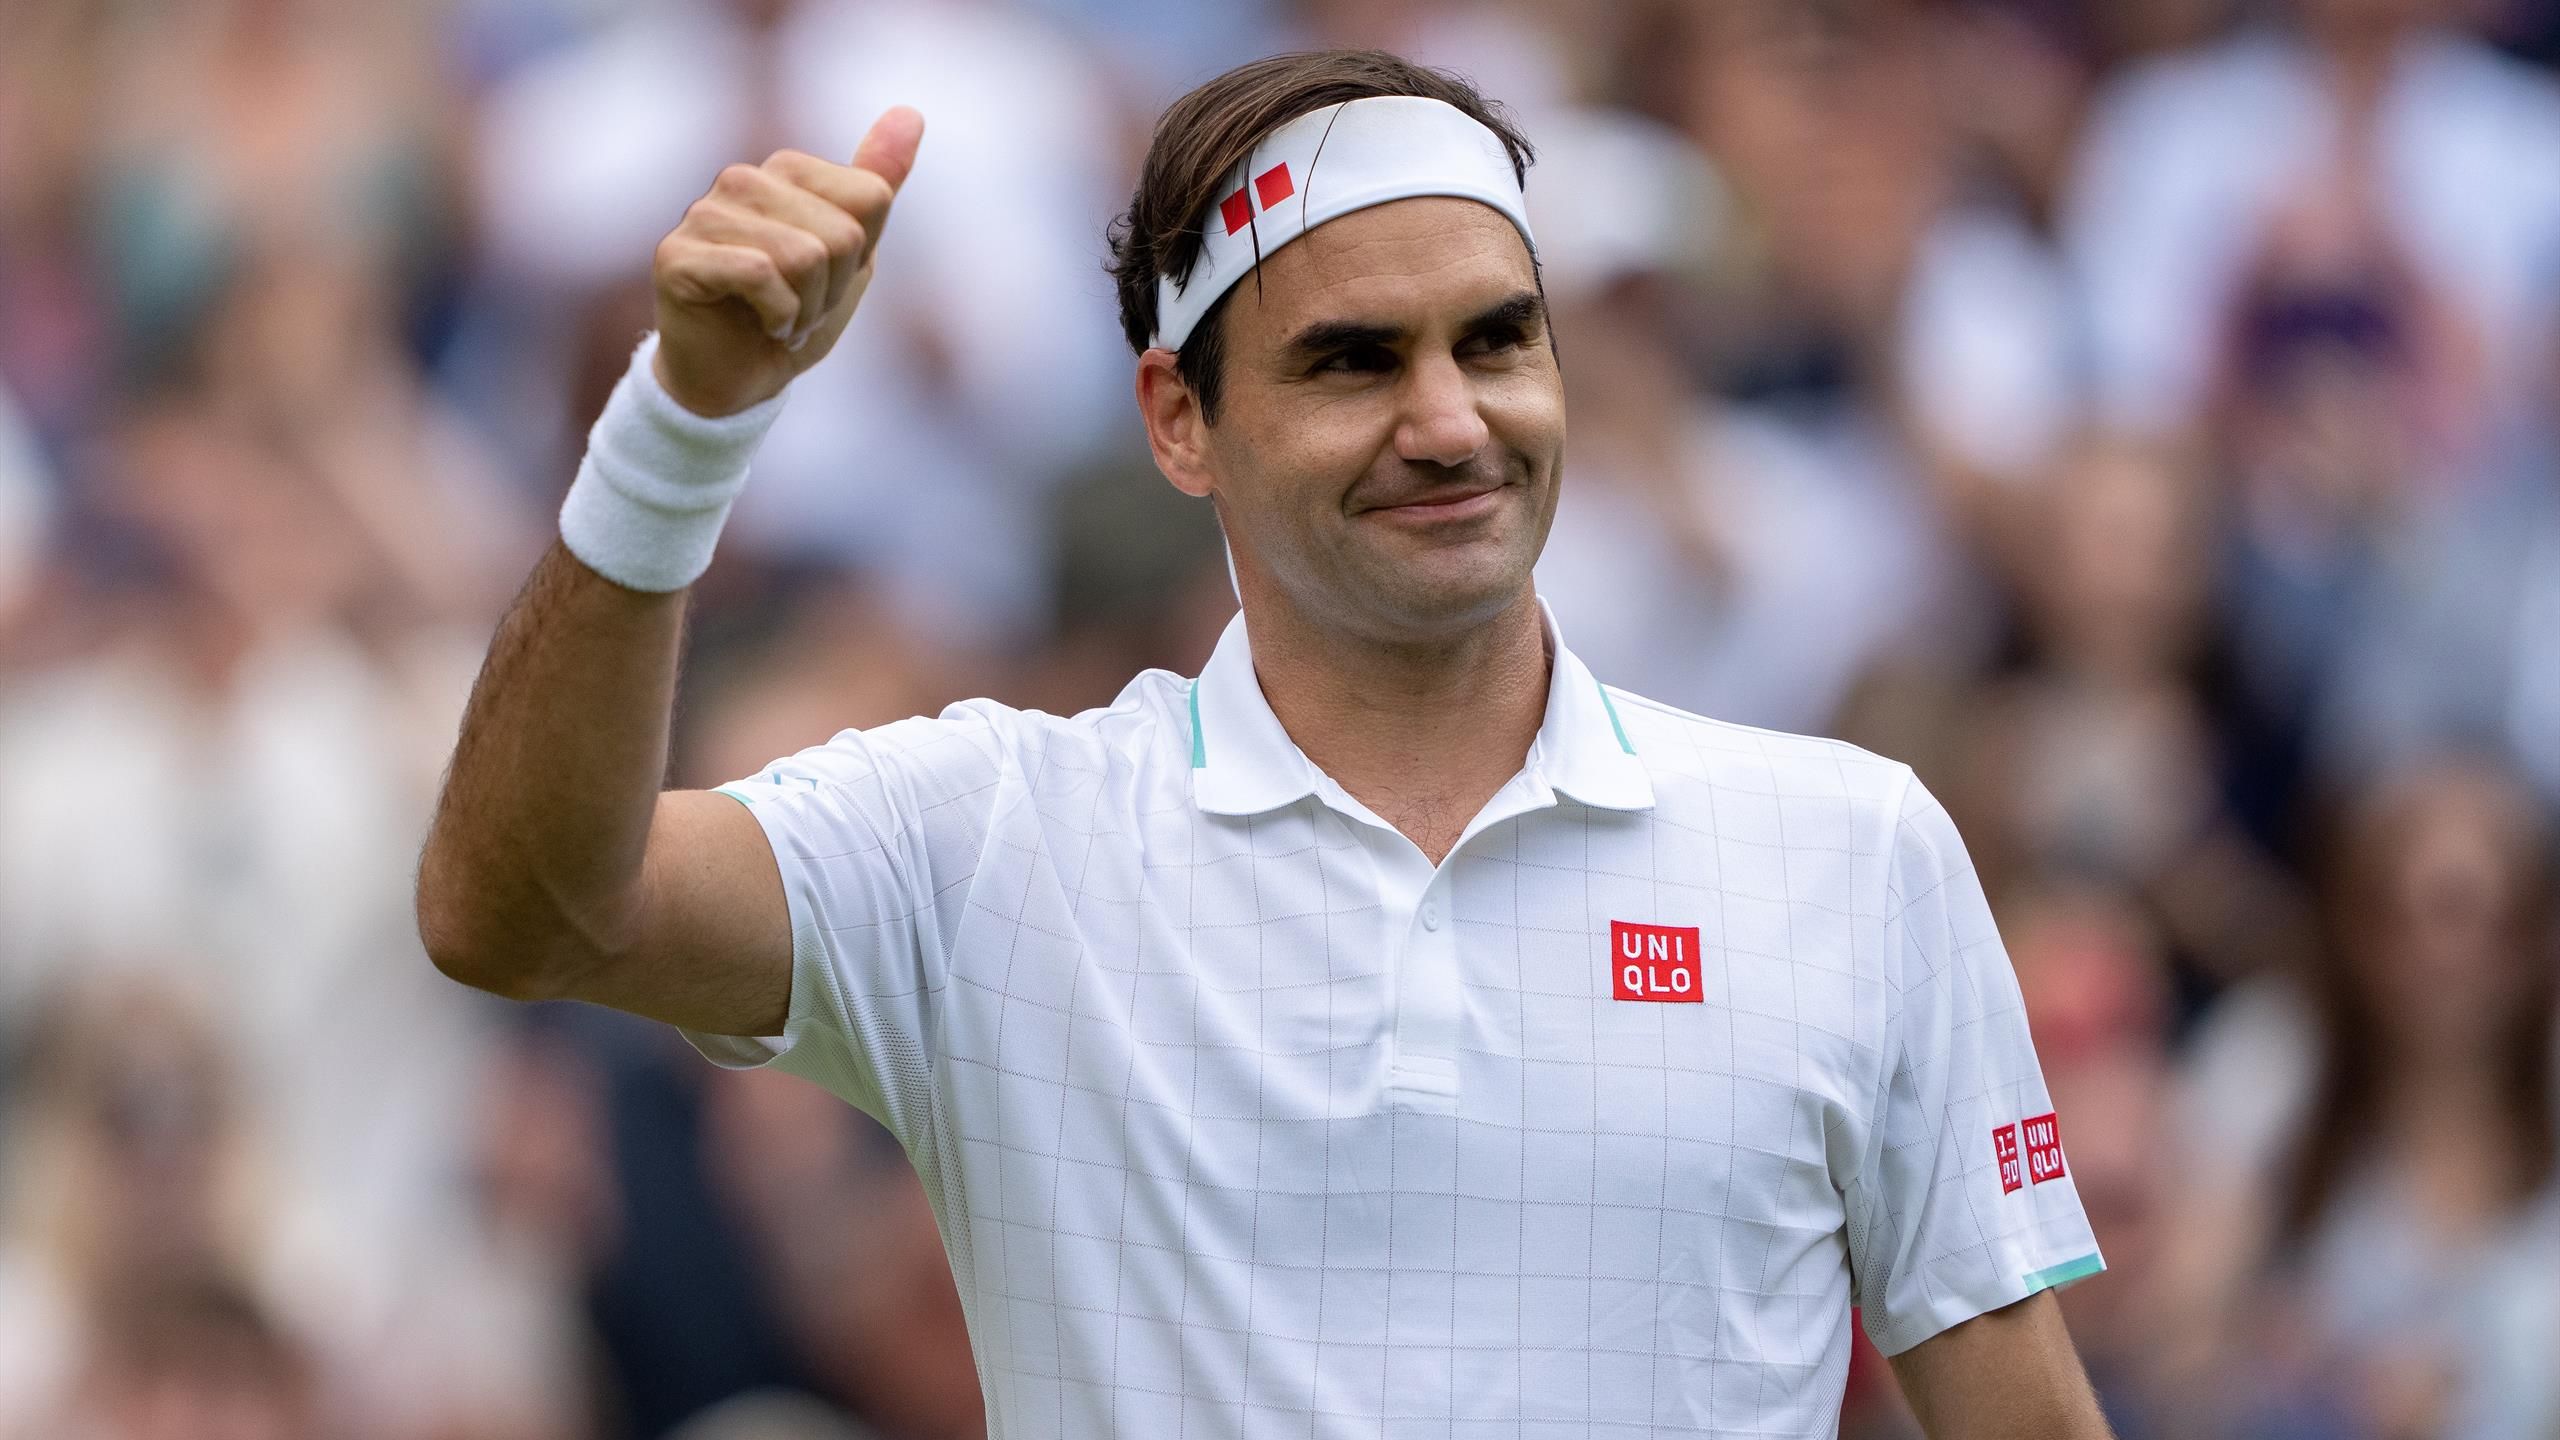 https://facts.net/wp-content/uploads/2023/07/16-facts-about-roger-federer-1689677372.jpg